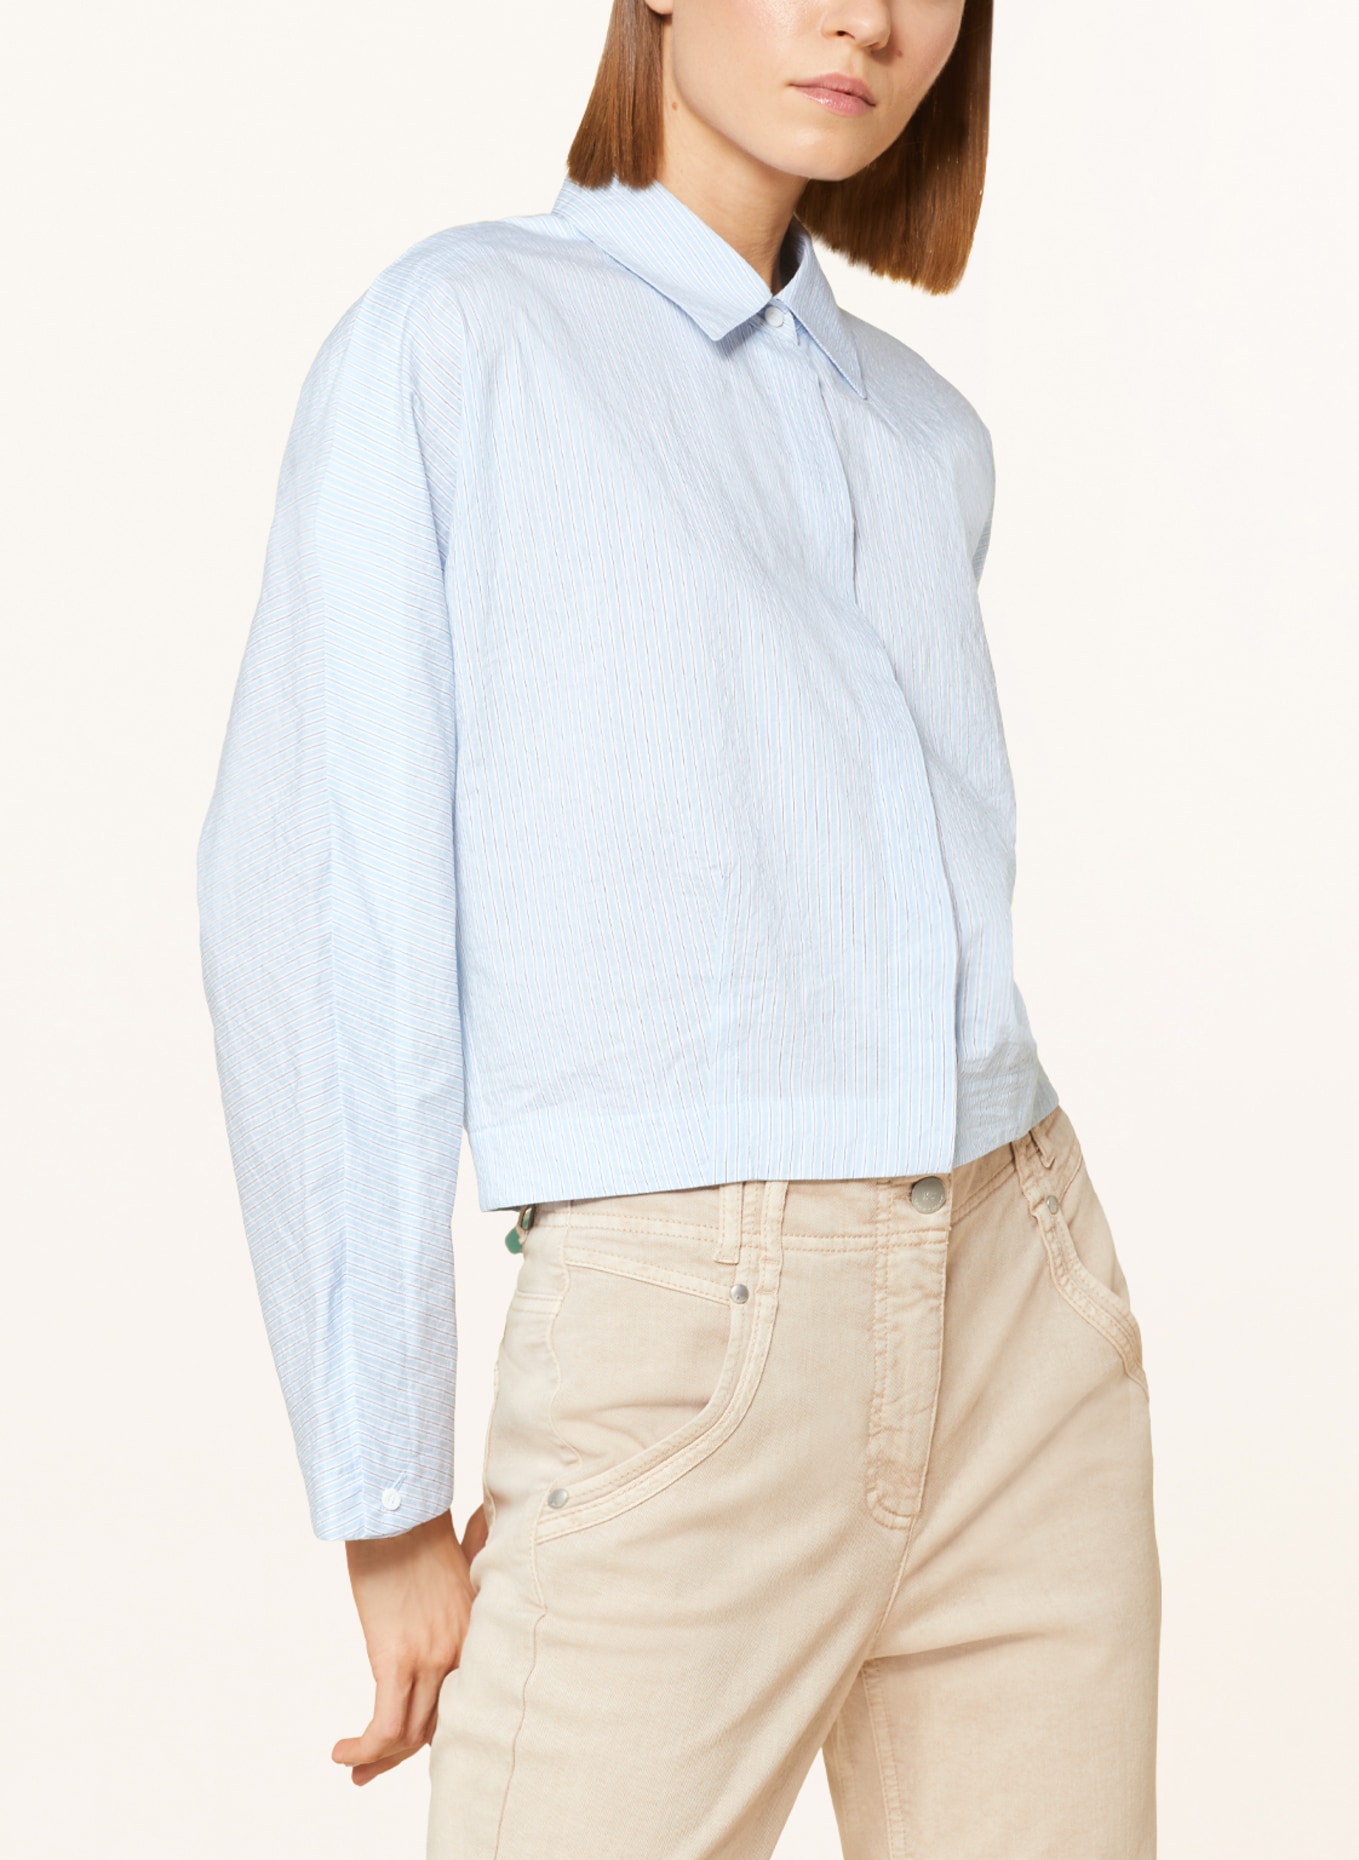 LUISA CERANO Cropped shirt blouse, Color: LIGHT BLUE/ WHITE (Image 4)